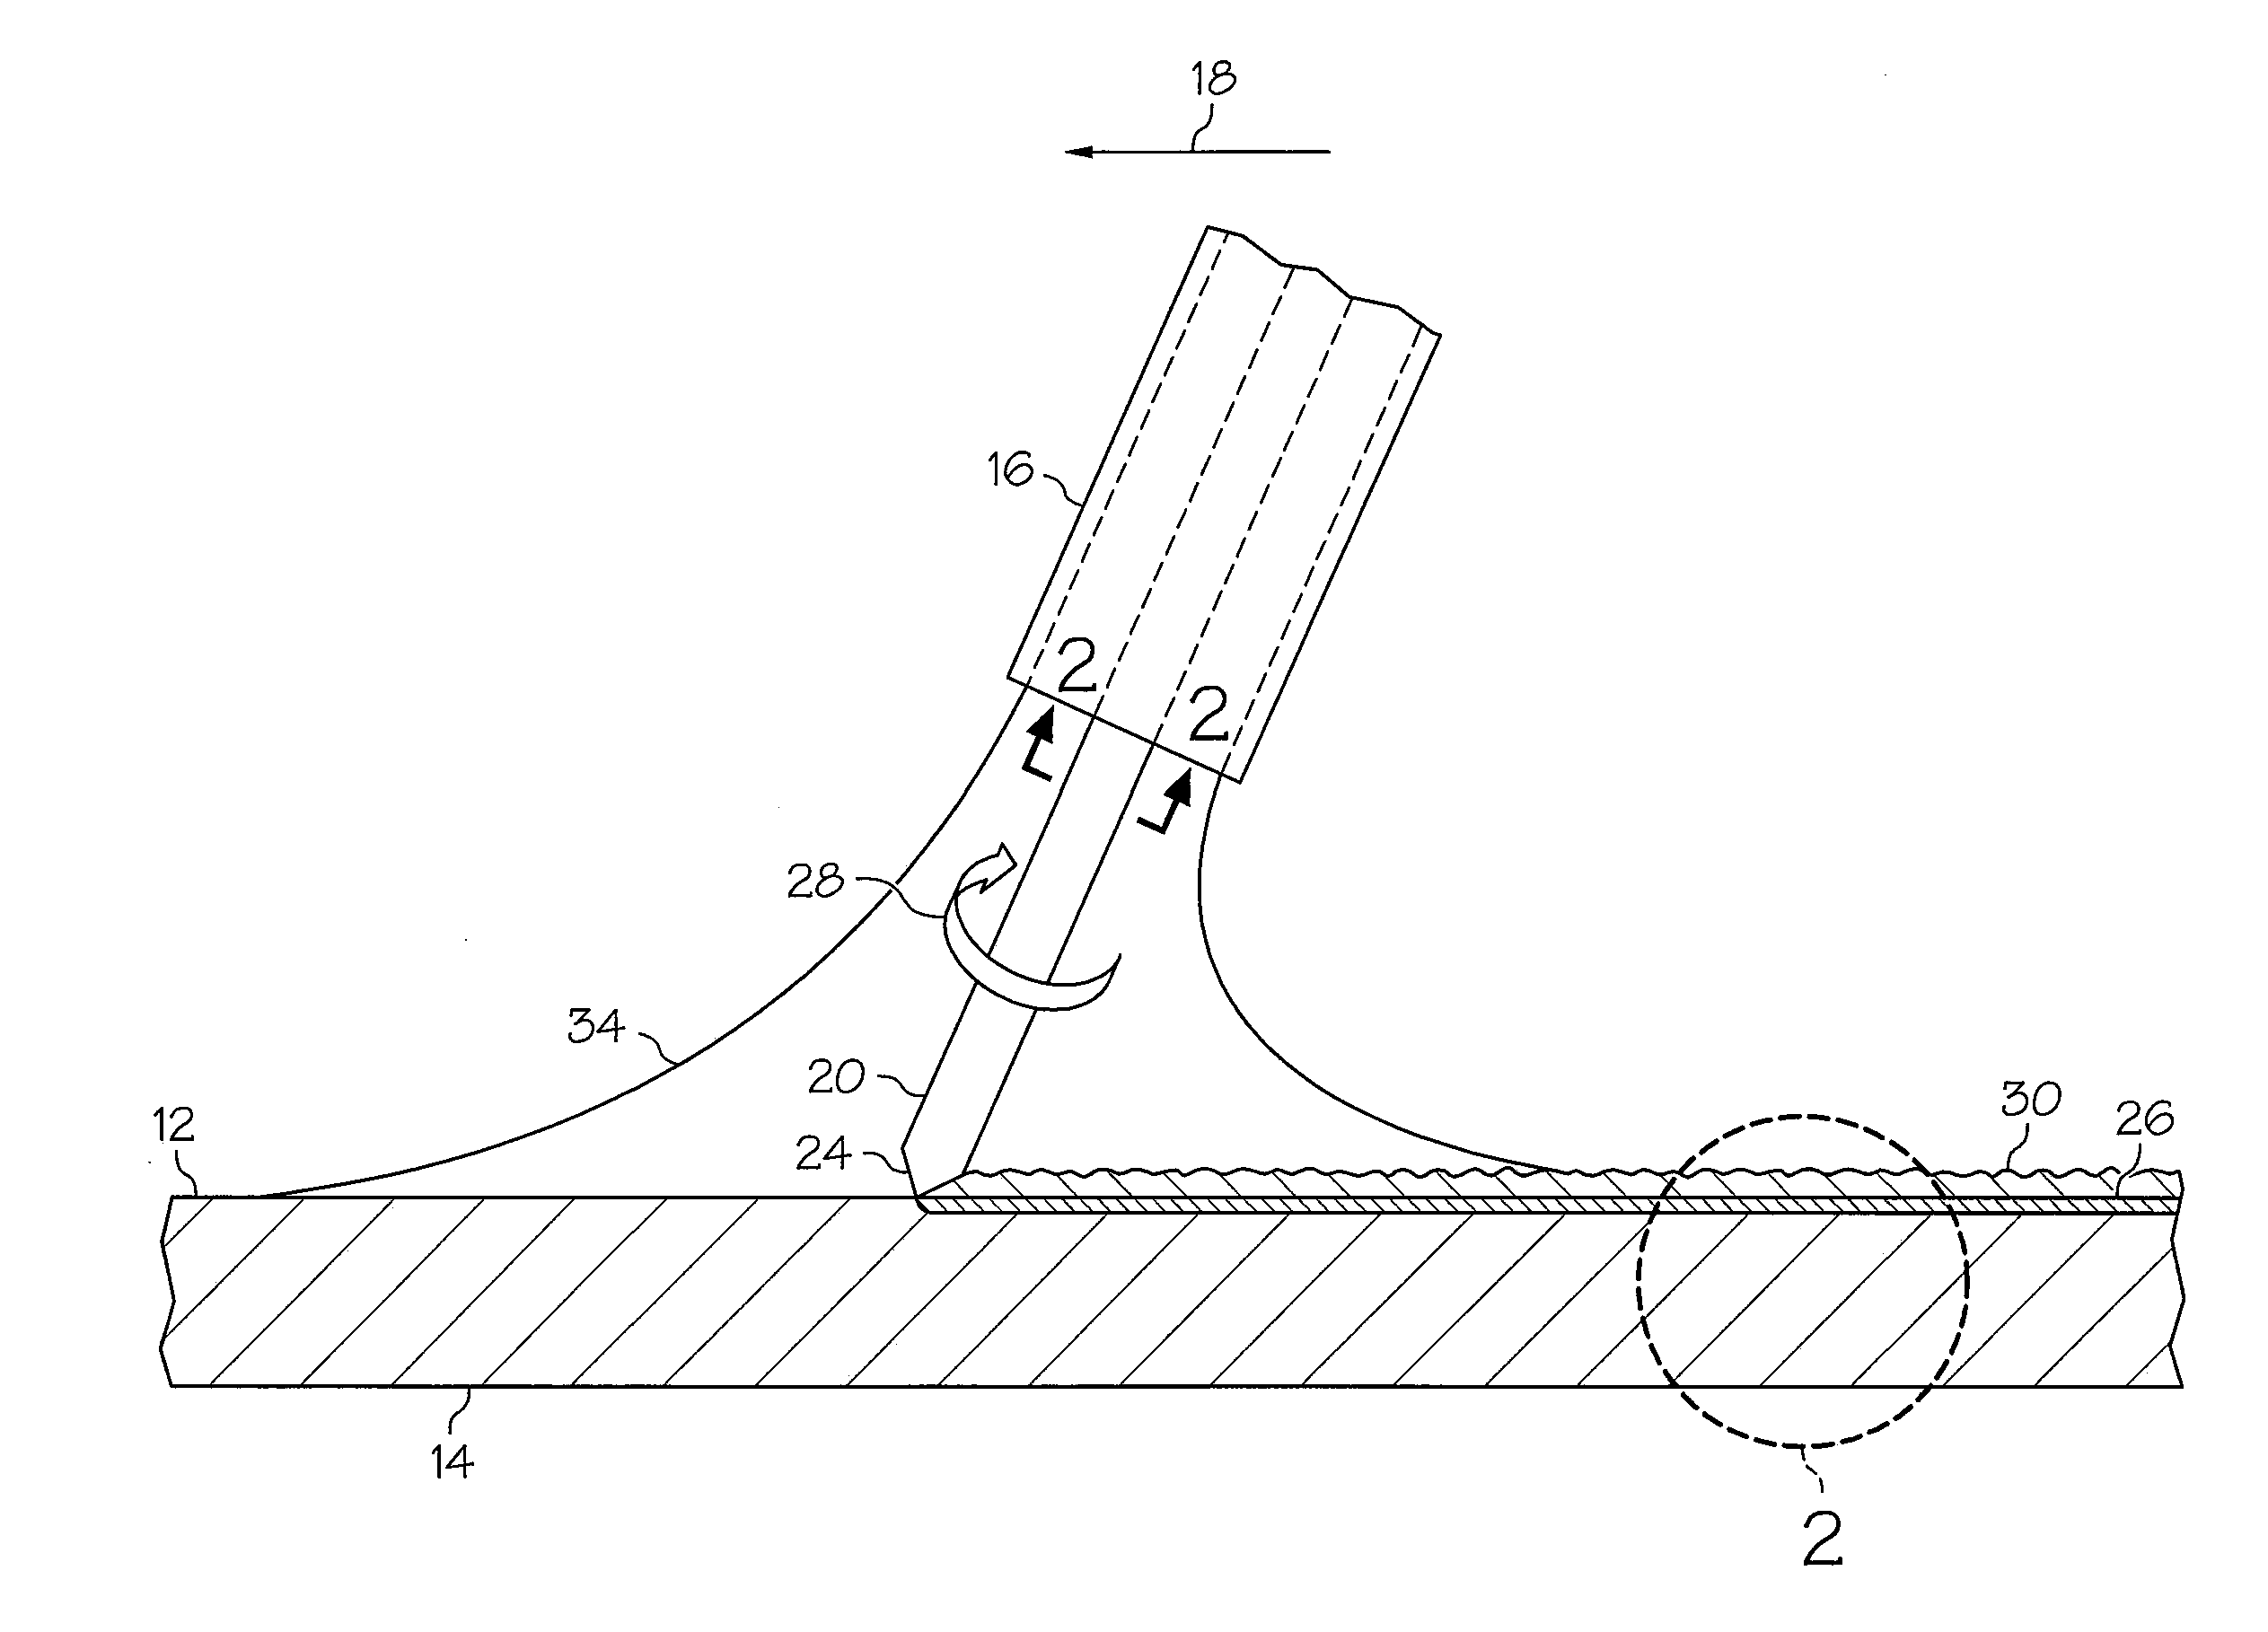 Coating/repairing process using electrospark with psp rod